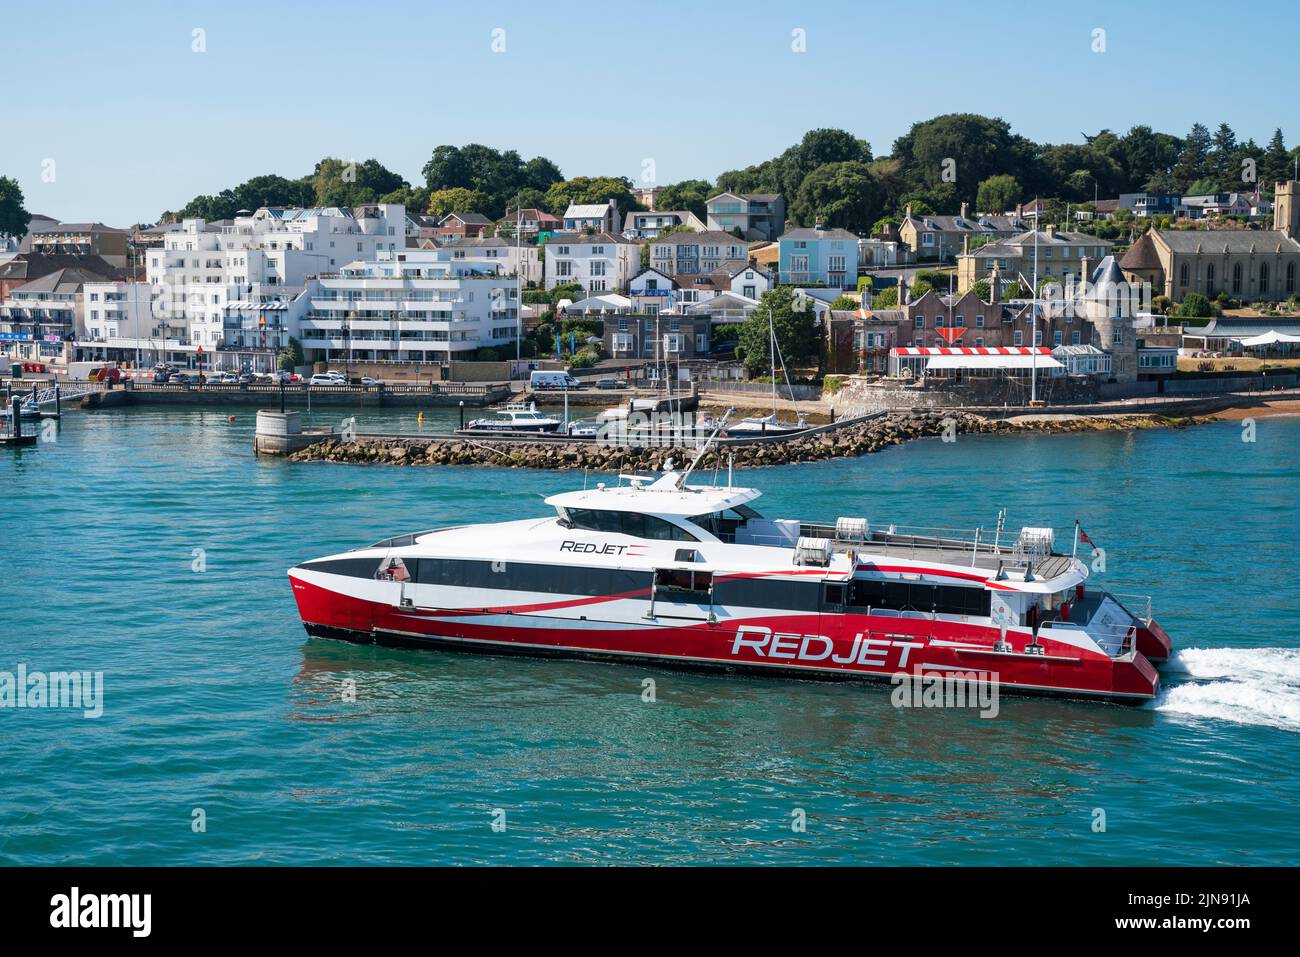 The Red Jet, a high speed catamaran operated by Red Funnel, makes its way in to West Cowes on the Isle of Wight in the summer holidays. Stock Photo